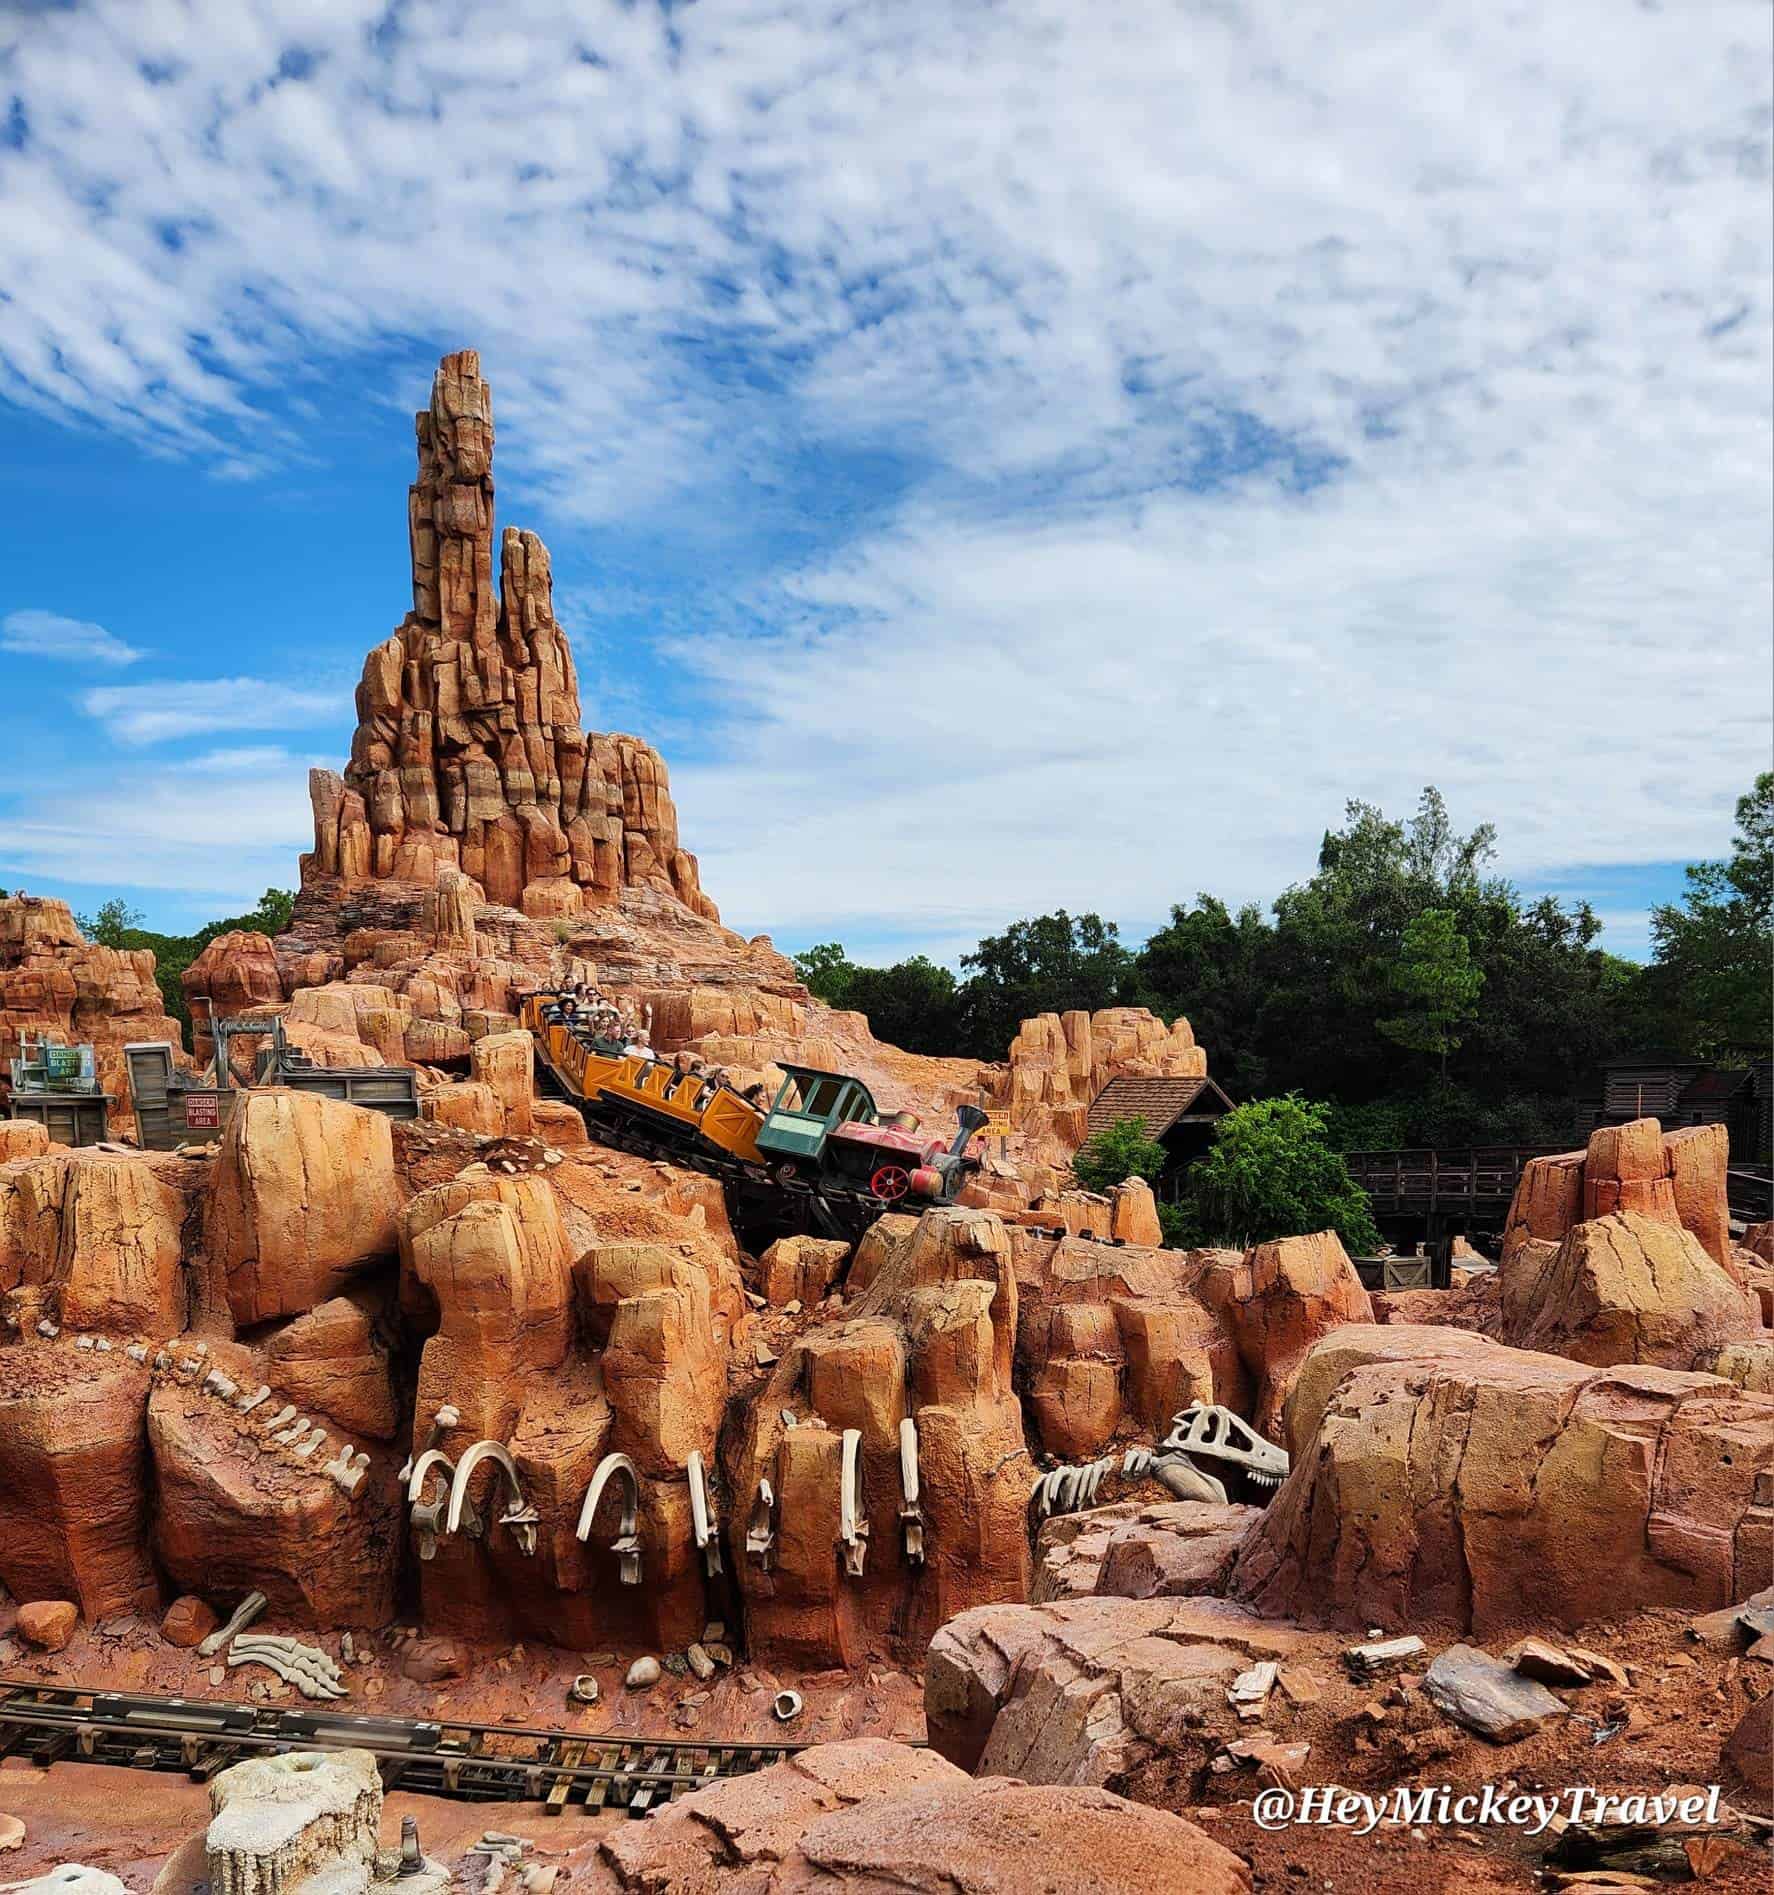 The wildest ride in the wilderness is one of the fastest rides at Disney World